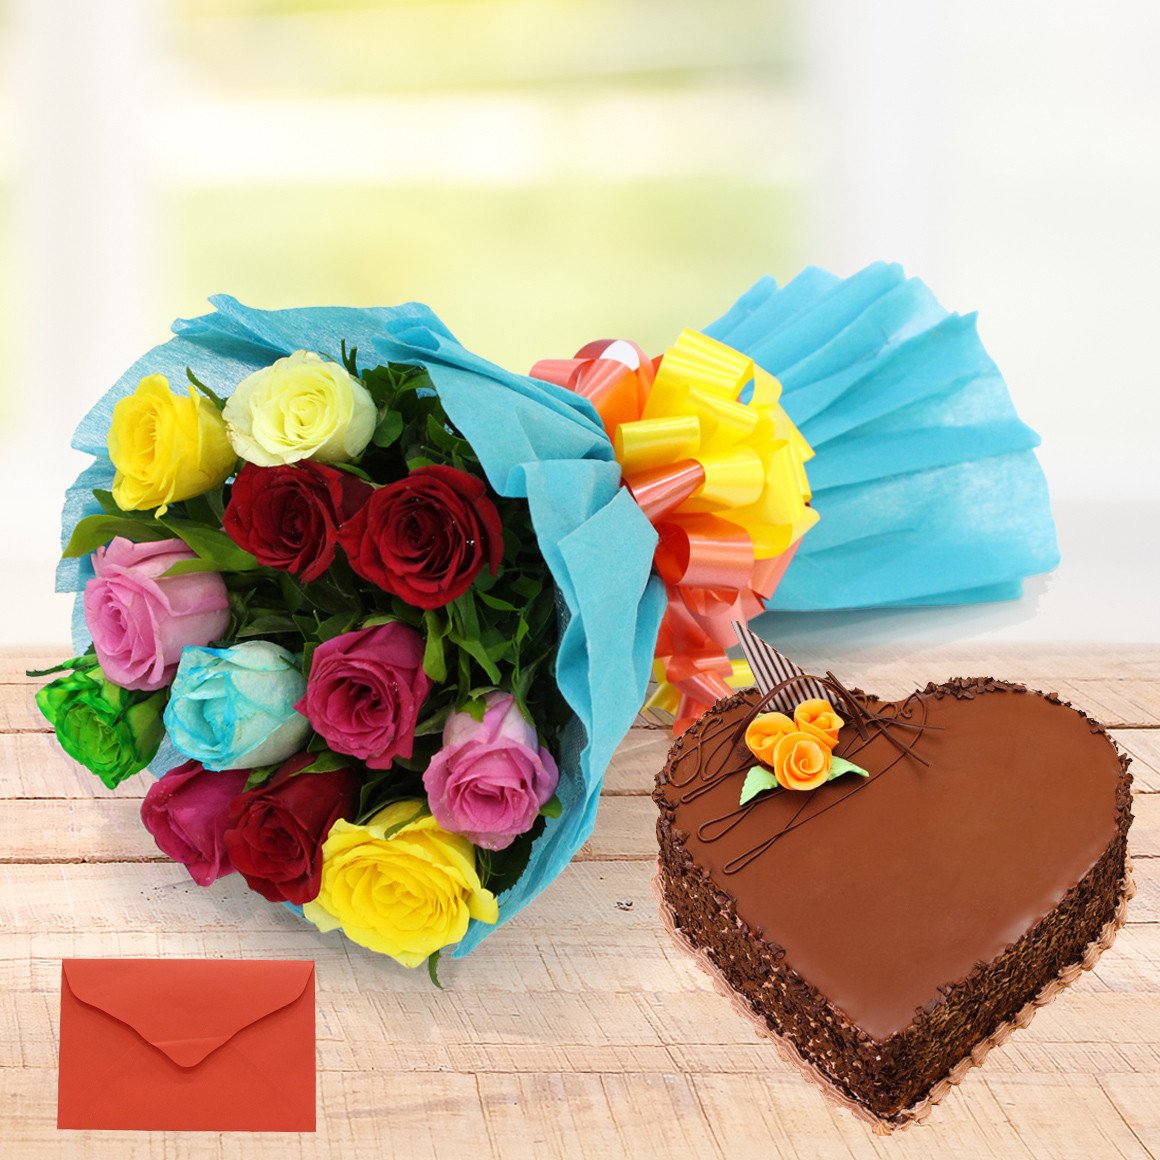 Mix Roses with Heart Shape Chocolate Cake